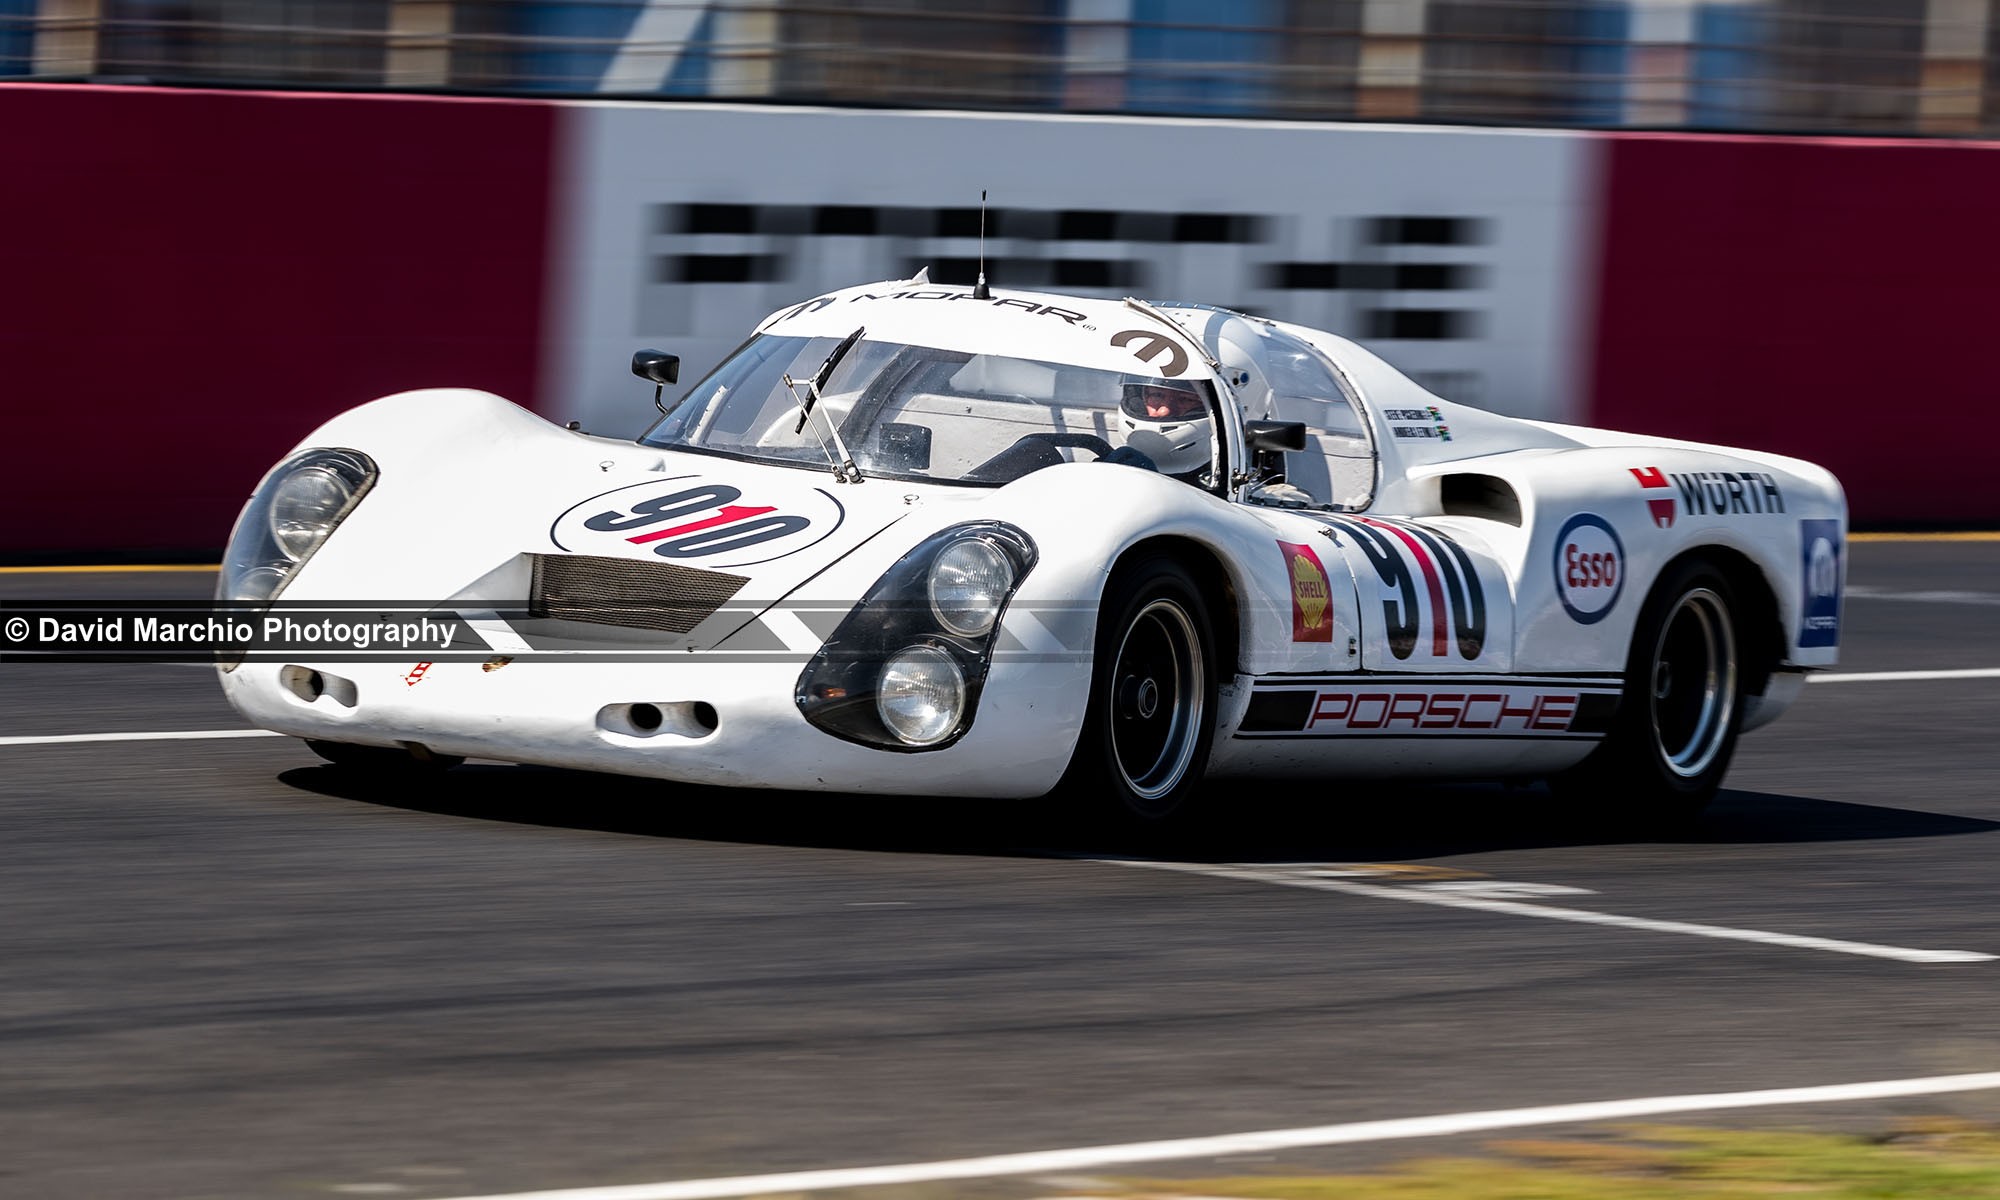 The Porsche 910 in bright white livery, making a return to the Campos 600